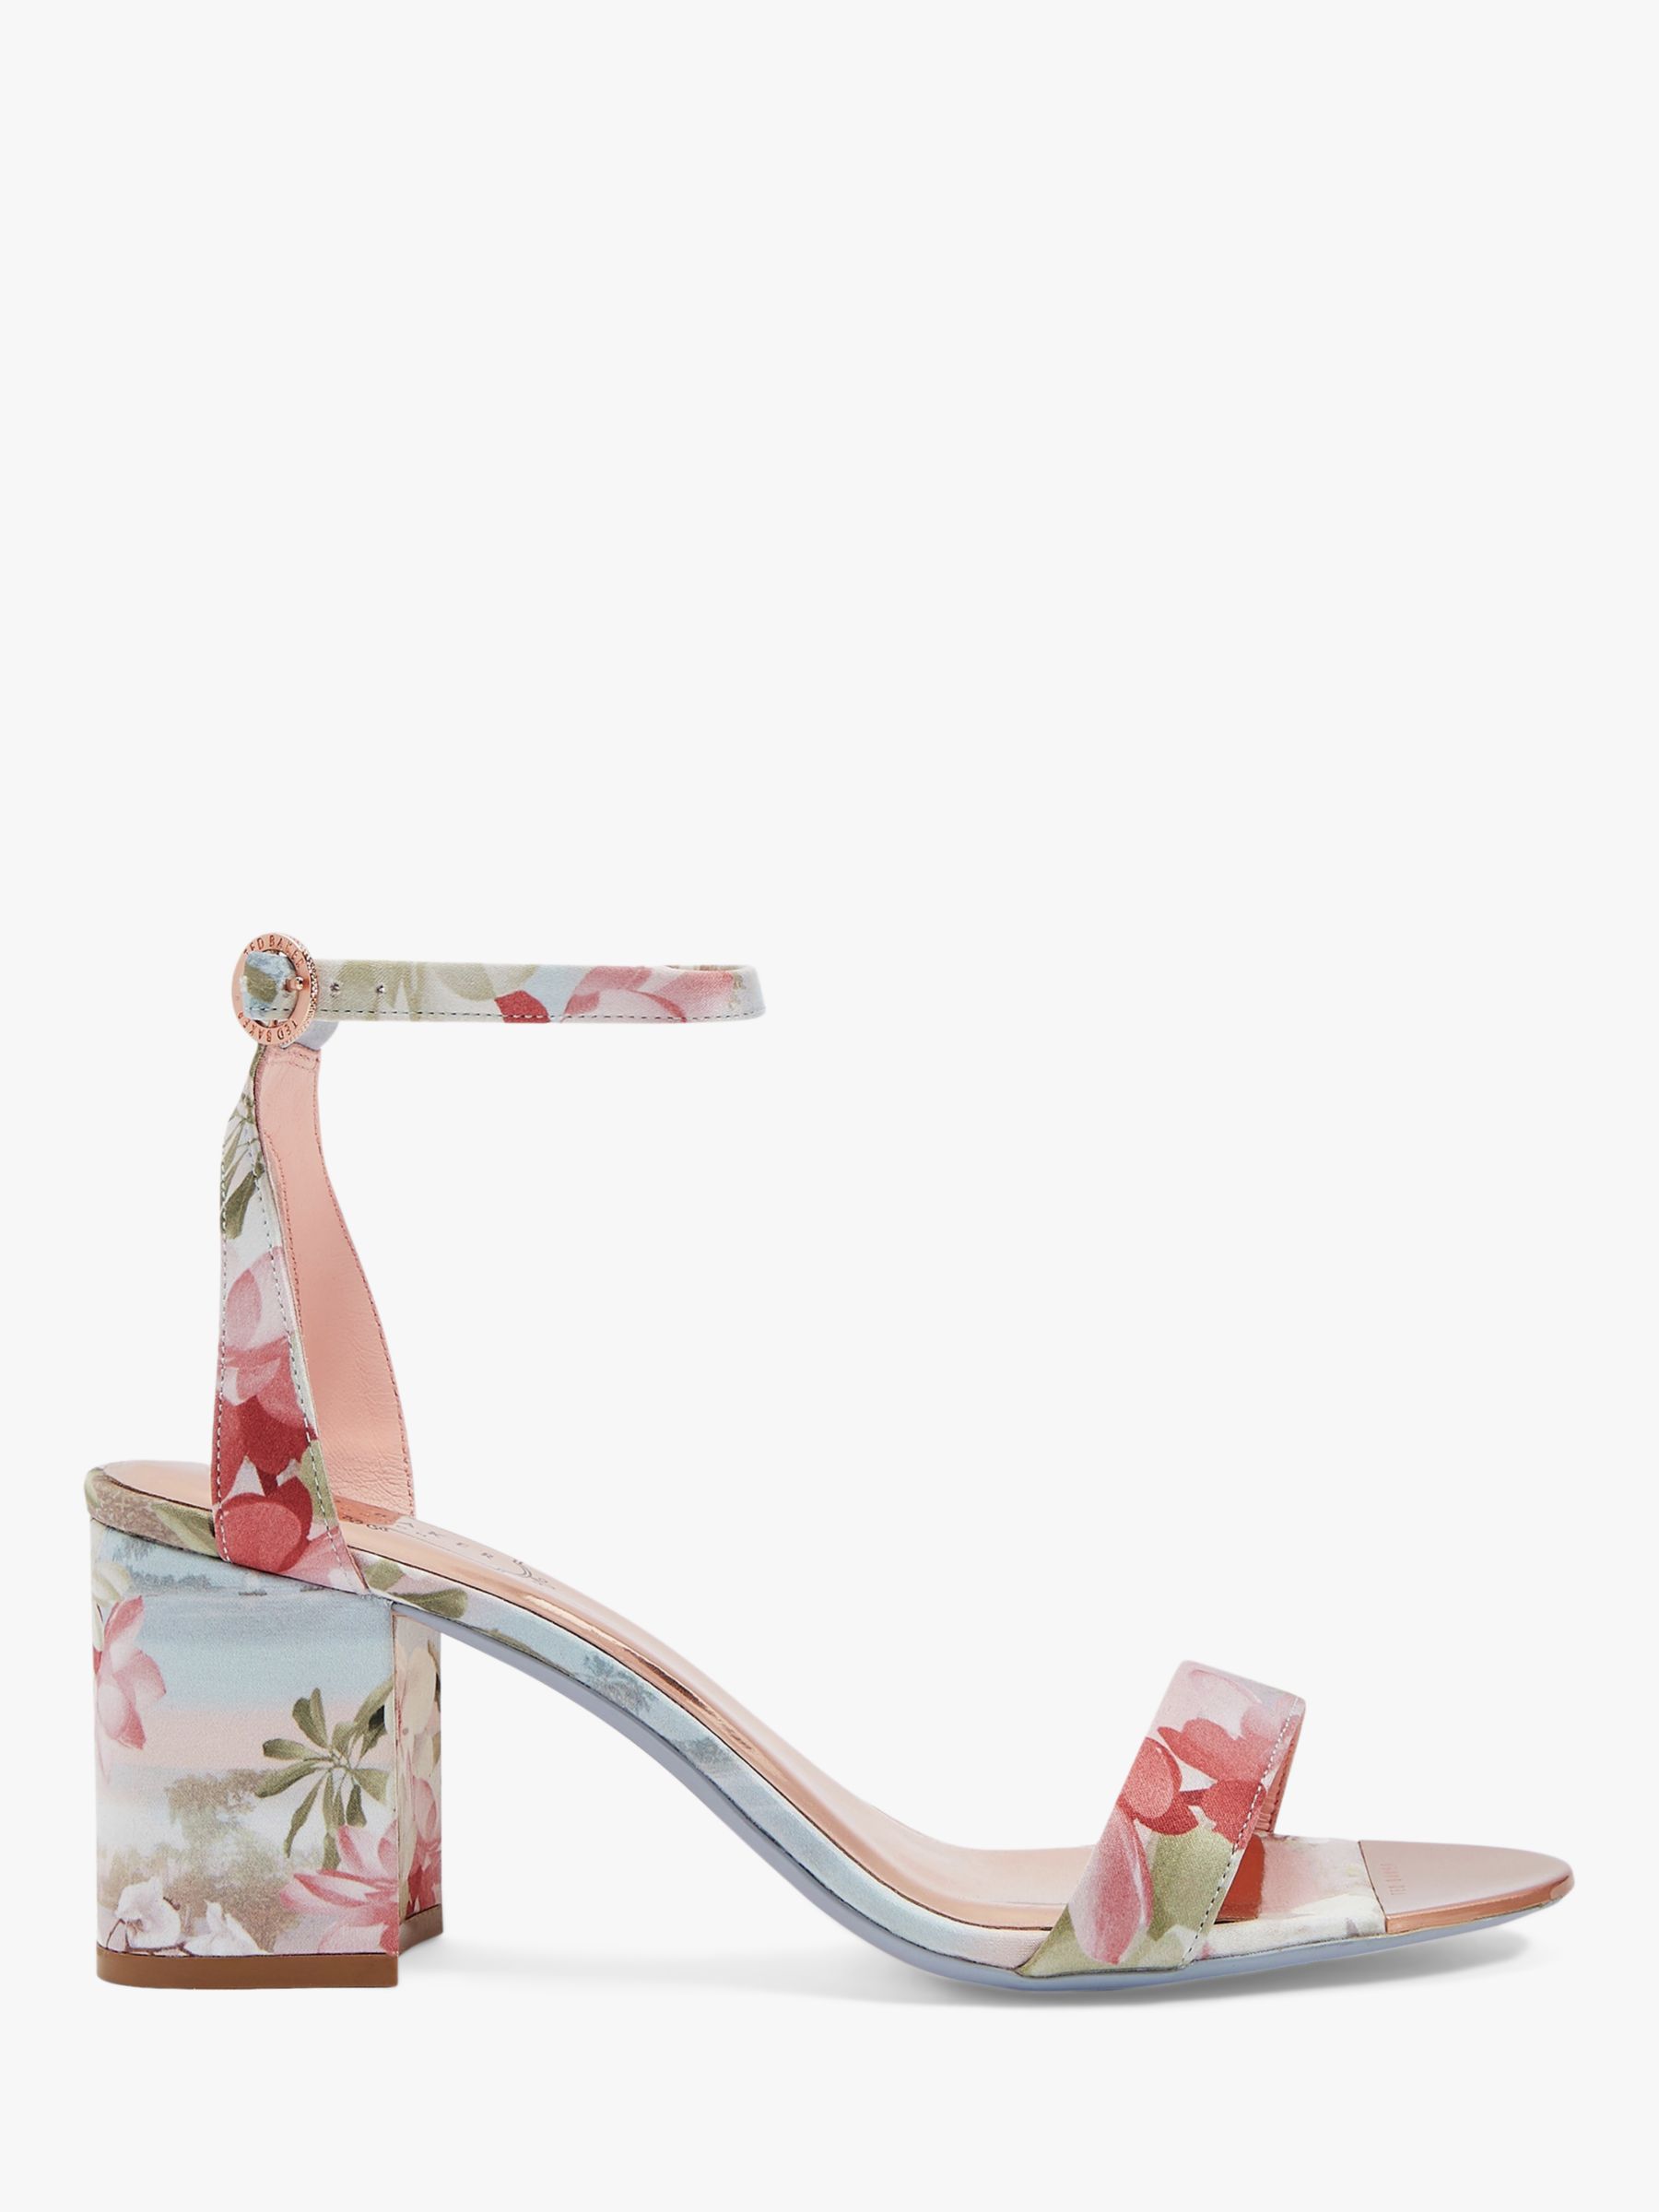 ted baker pale blue shoes